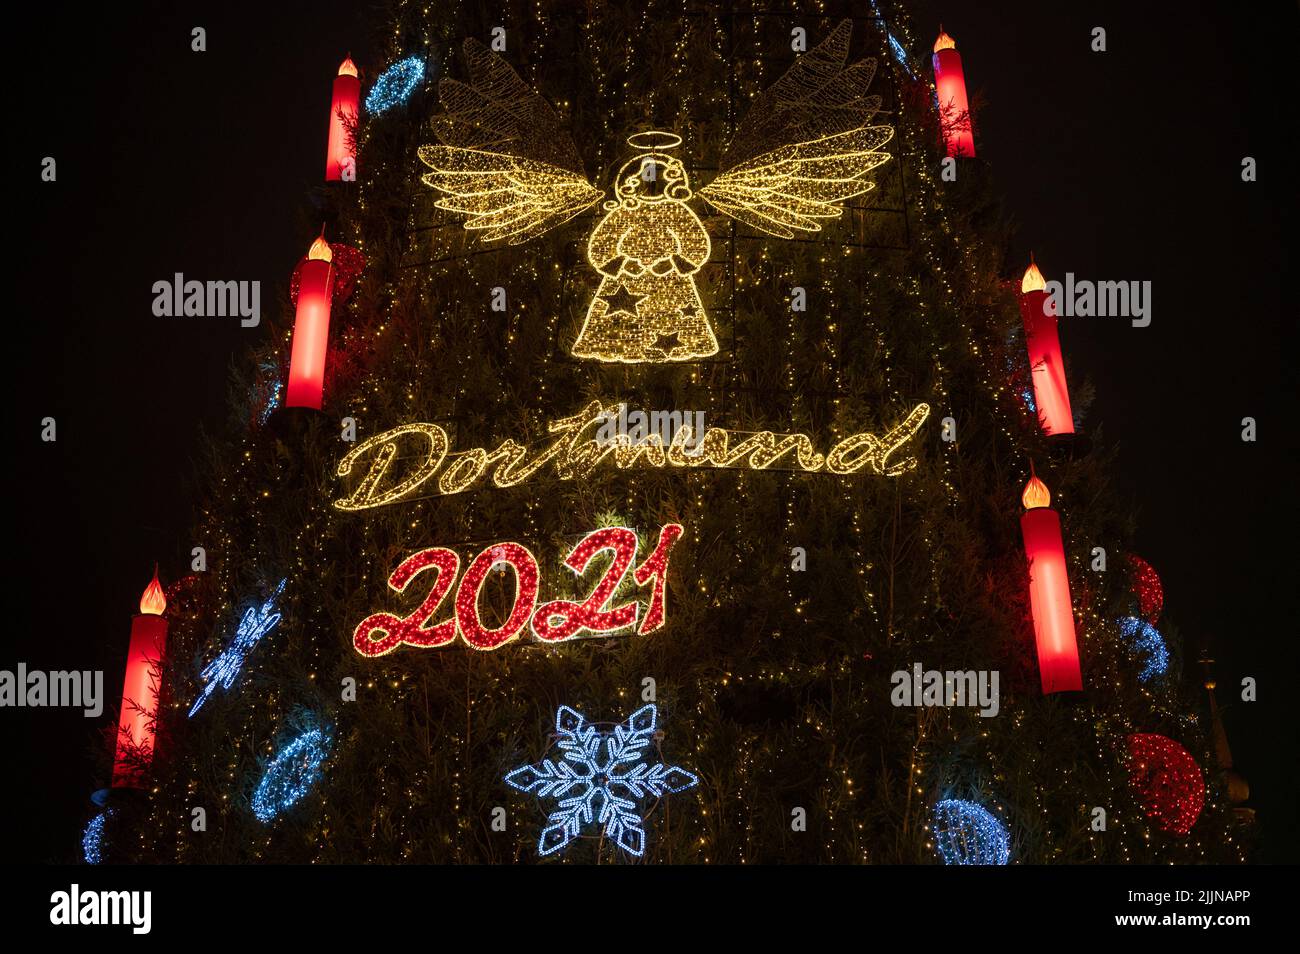 The beautiful Christmas angel and other decorations on the tree in Dortmund Christmas Market 2021. Stock Photo